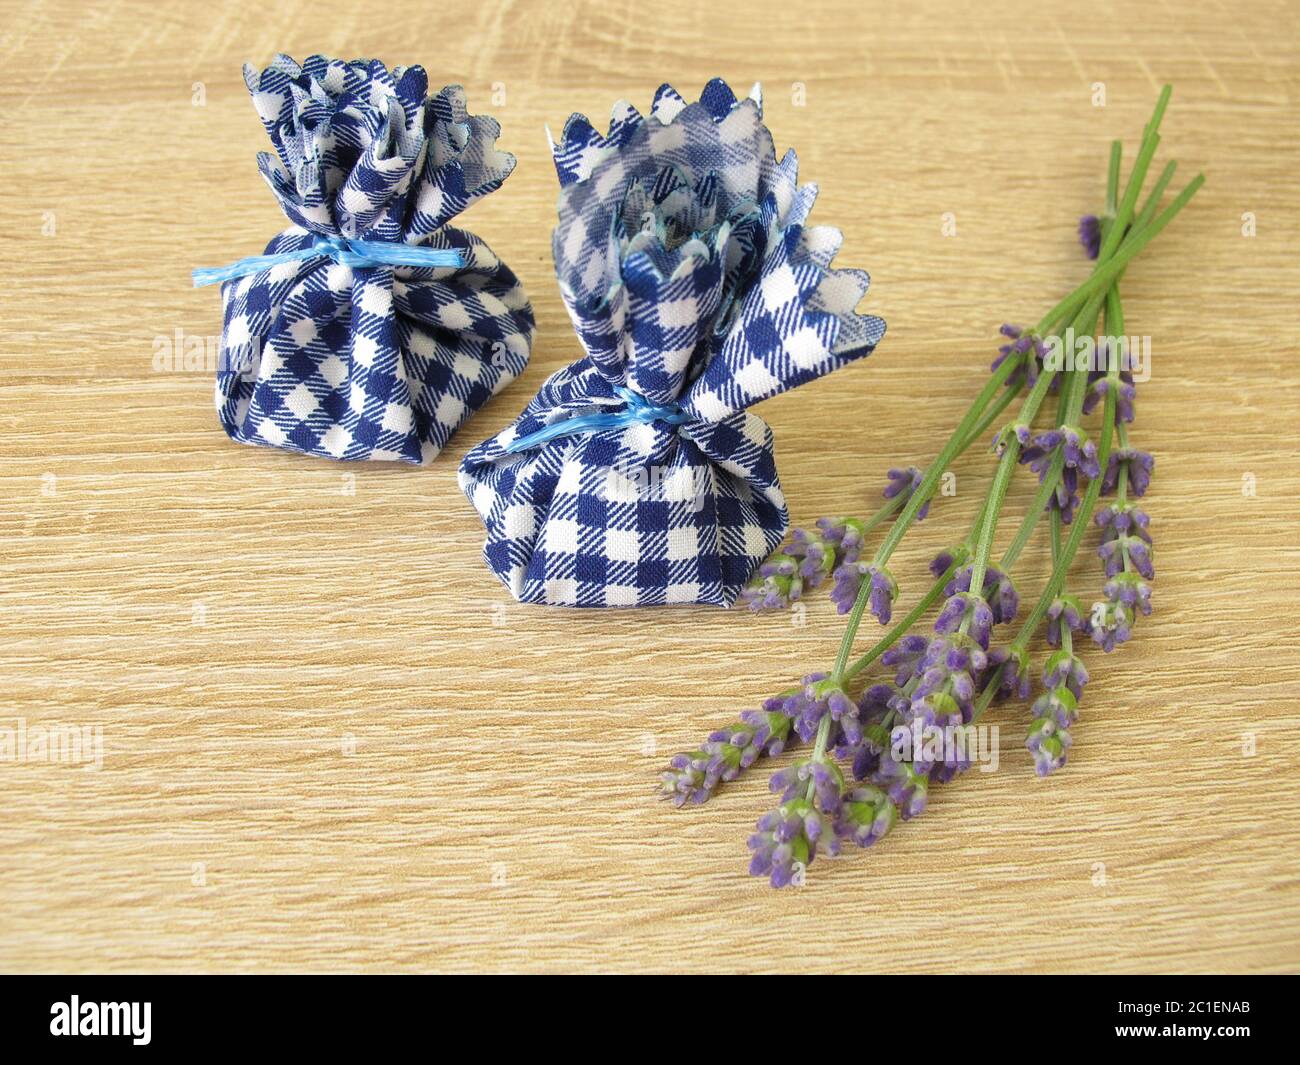 Lavender bags and lavender Stock Photo